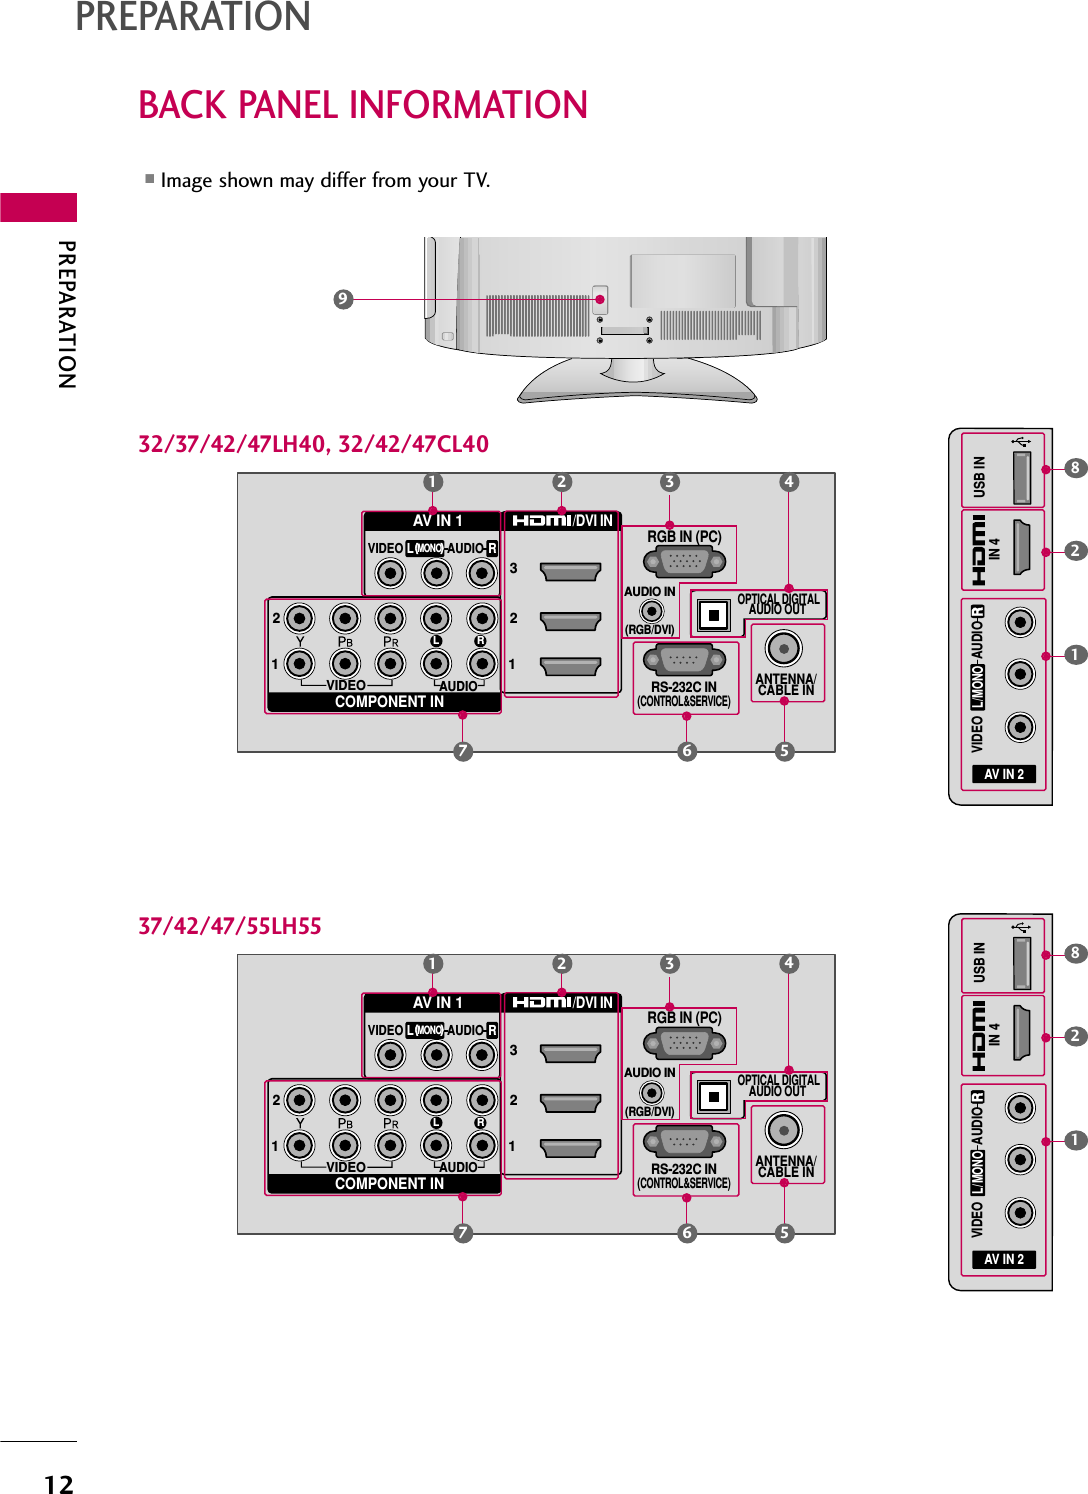 PREPARATION12BACK PANEL INFORMATIONPREPARATION■Image shown may differ from your TV.VIDEOAUDIOL RRS-232C IN(CONTROL&amp;SERVICE)AUDIO IN(RGB/DVI)OPTICAL DIGITALAUDIO OUT ANTENNA/CABLE INRGB IN (PC)AV IN 1COMPONENT IN23121MONO( )AUDIOVIDEO/DVI INLR1 2 36 5732/37/42/47LH40, 32/42/47CL409AV IN 2L/MONORAUDIOVIDEOUSB ININ 4182AV IN 2L/MONORAUDIOVIDEOUSB ININ 41824VIDEOAUDIOL RRS-232C IN(CONTROL&amp;SERVICE)AUDIO IN(RGB/DVI)OPTICAL DIGITALAUDIO OUT ANTENNA/CABLE INRGB IN (PC)AV IN 1COMPONENT IN23121MONO( )AUDIOVIDEO/DVI INLR1 2 36 5737/42/47/55LH554